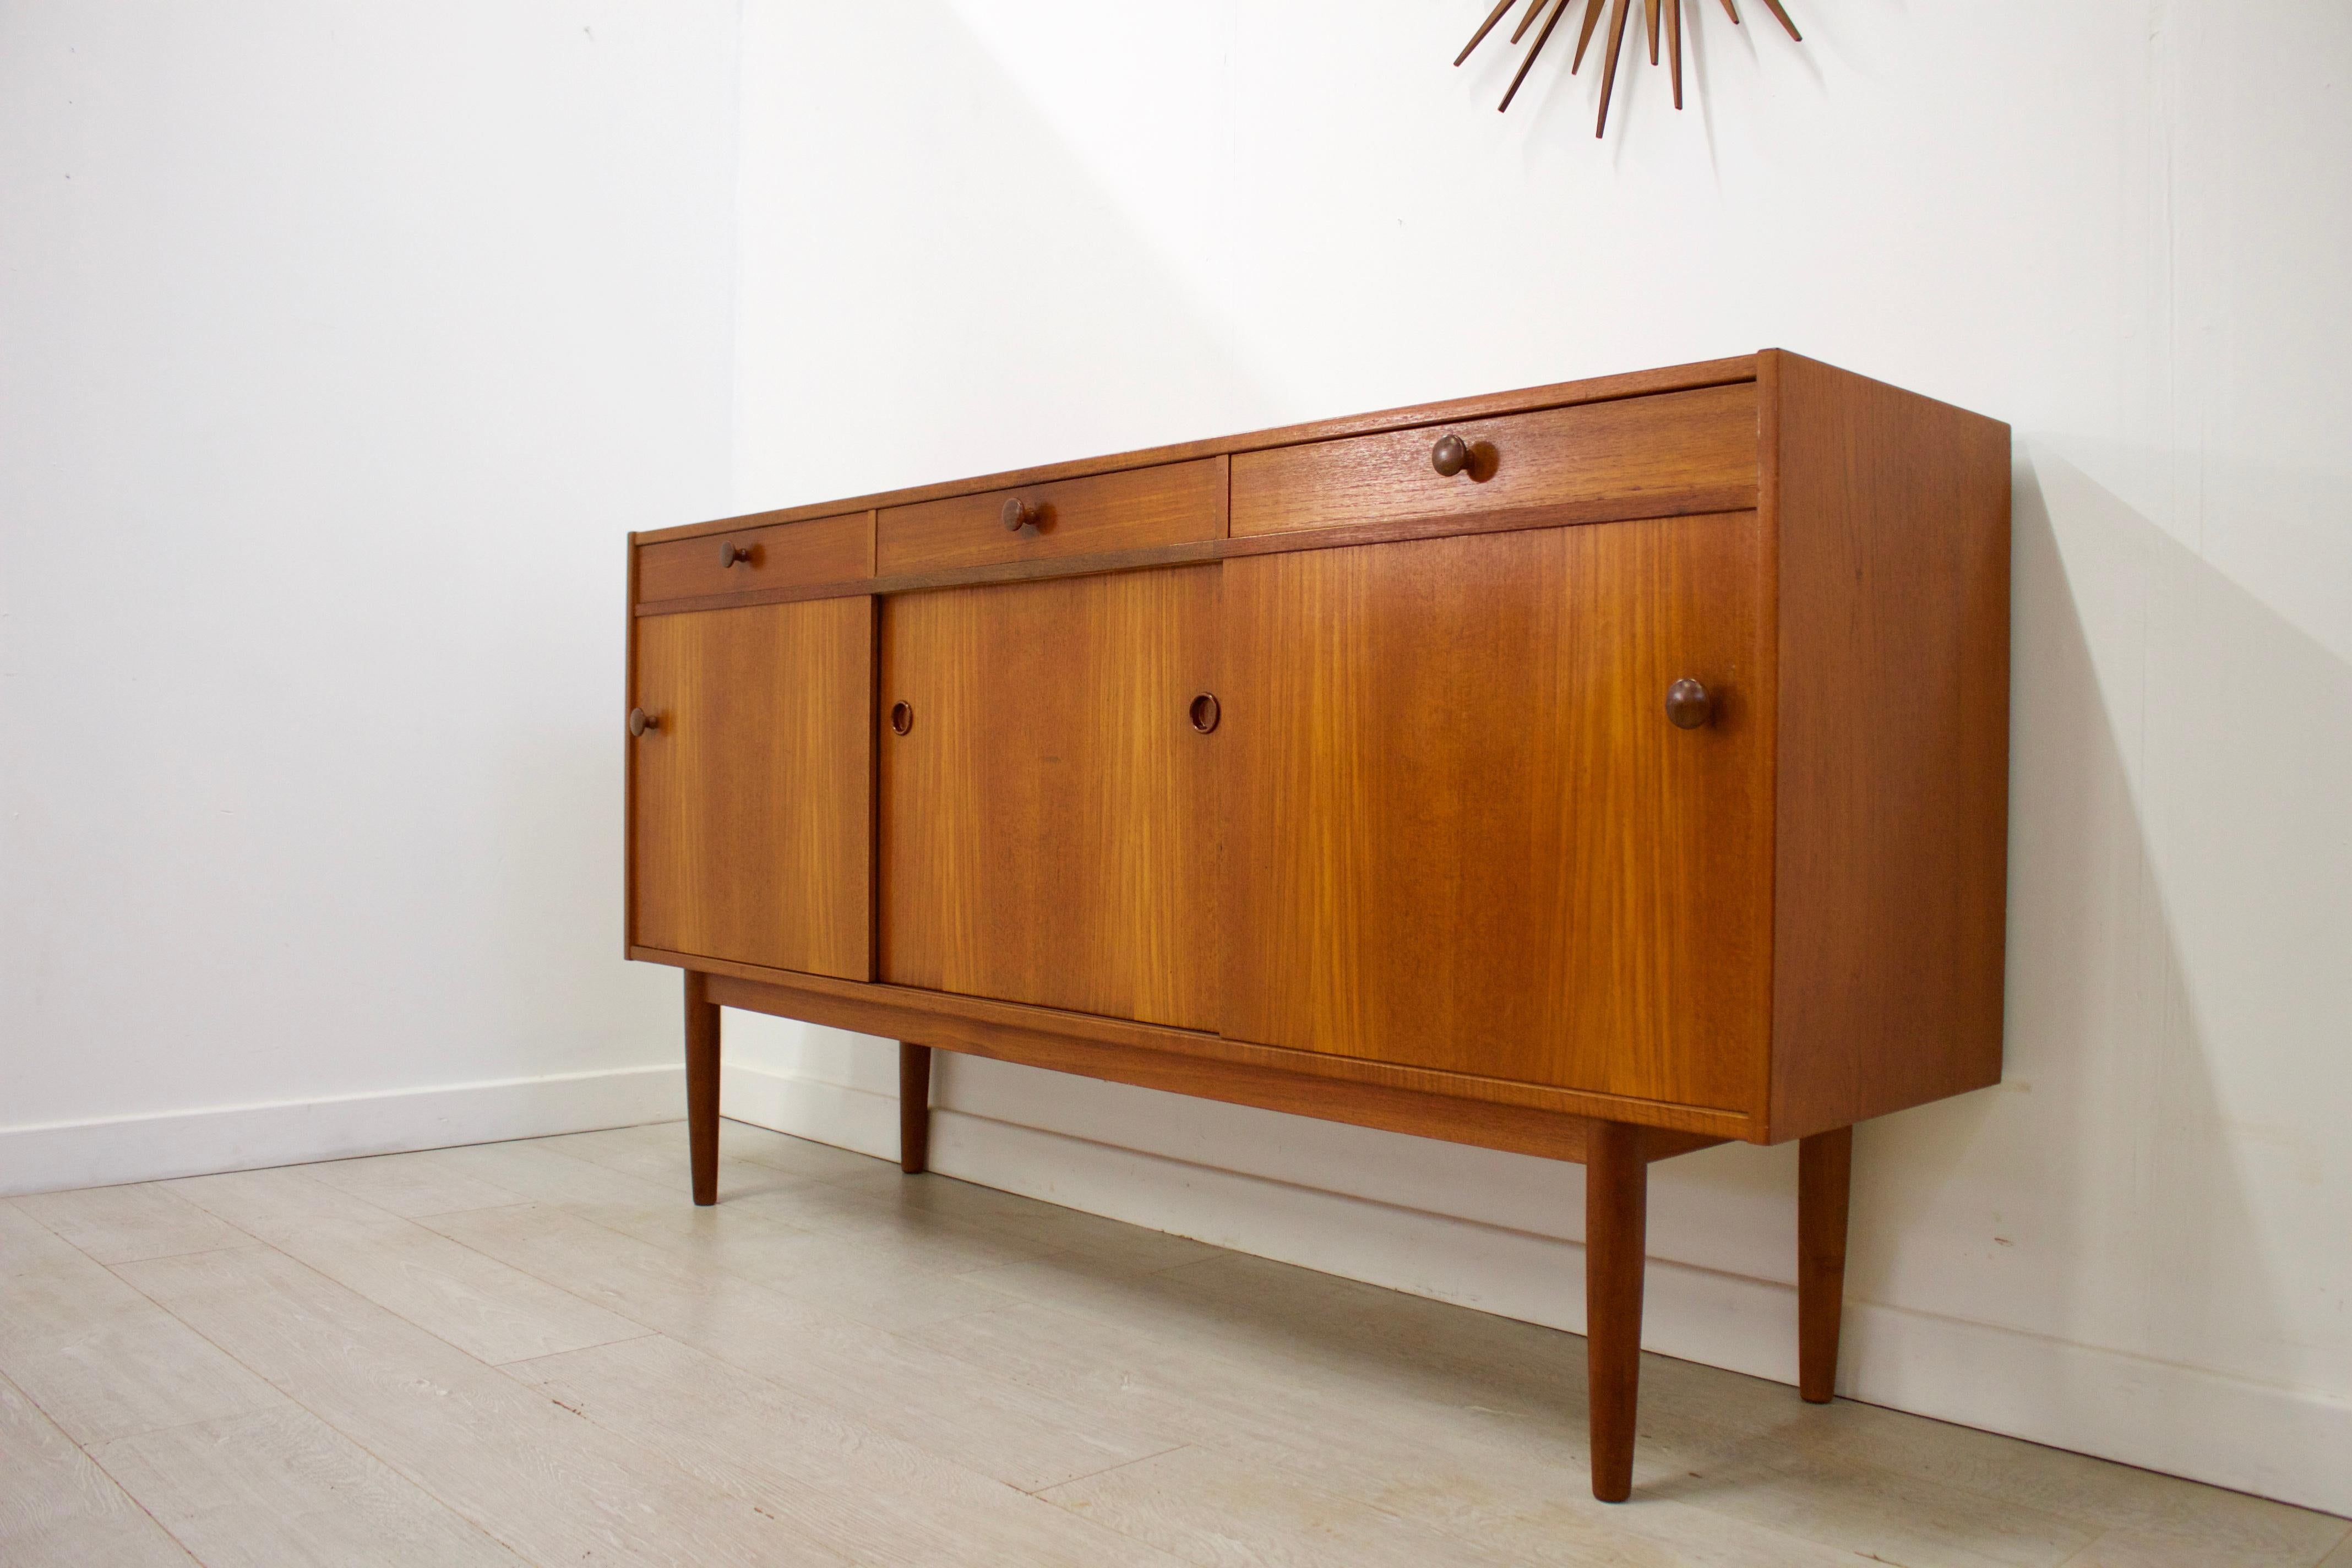 - Mid-Century Modern sideboard.
- Designed by Nils Jonsson for Troeds.
- Manufactured in Sweden.
- Made from teak and teak veneer.